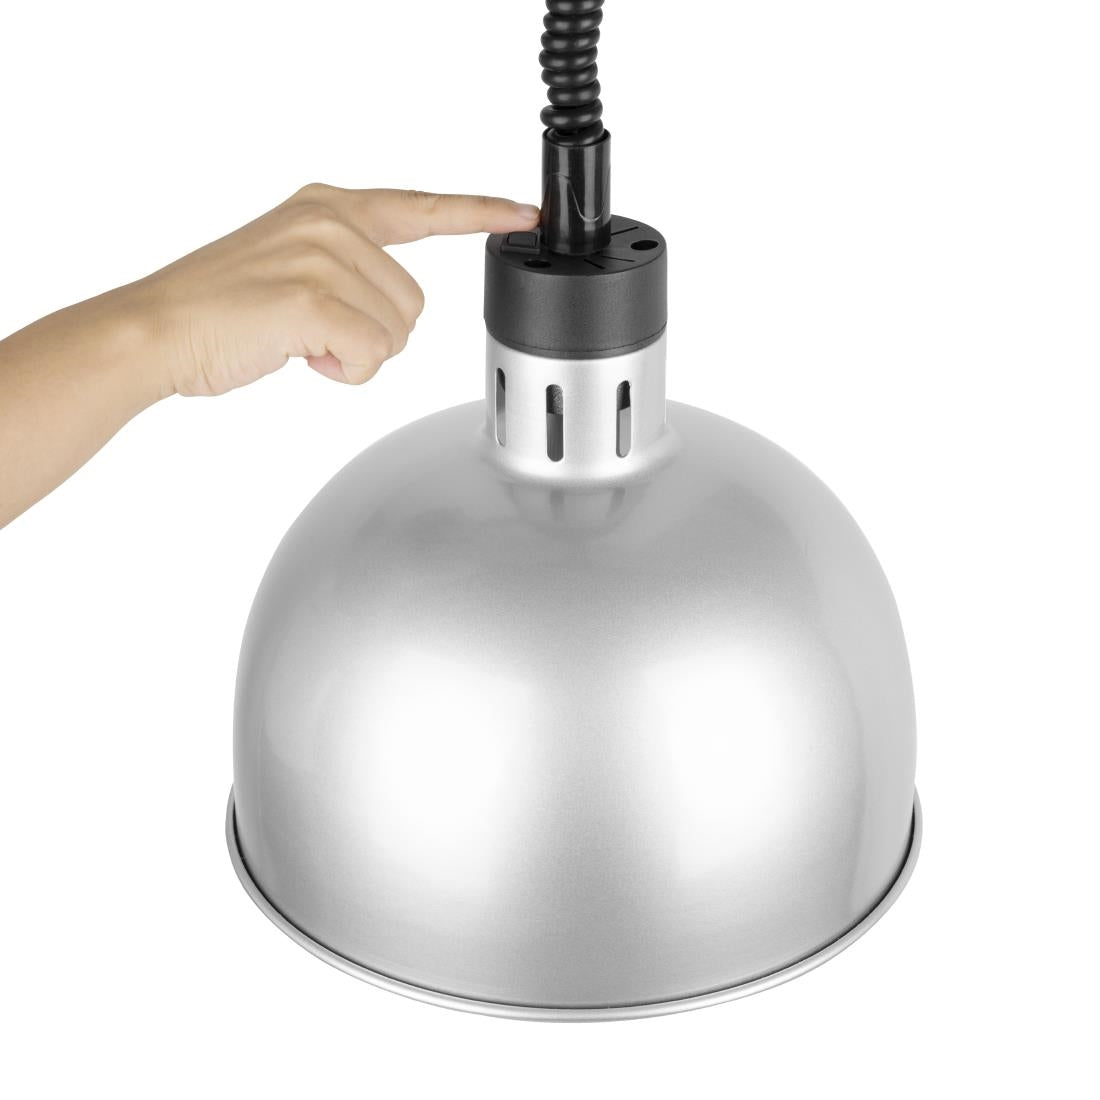 DY461 Buffalo Retractable Dome Heat Lamp Silver 2.5kW JD Catering Equipment Solutions Ltd